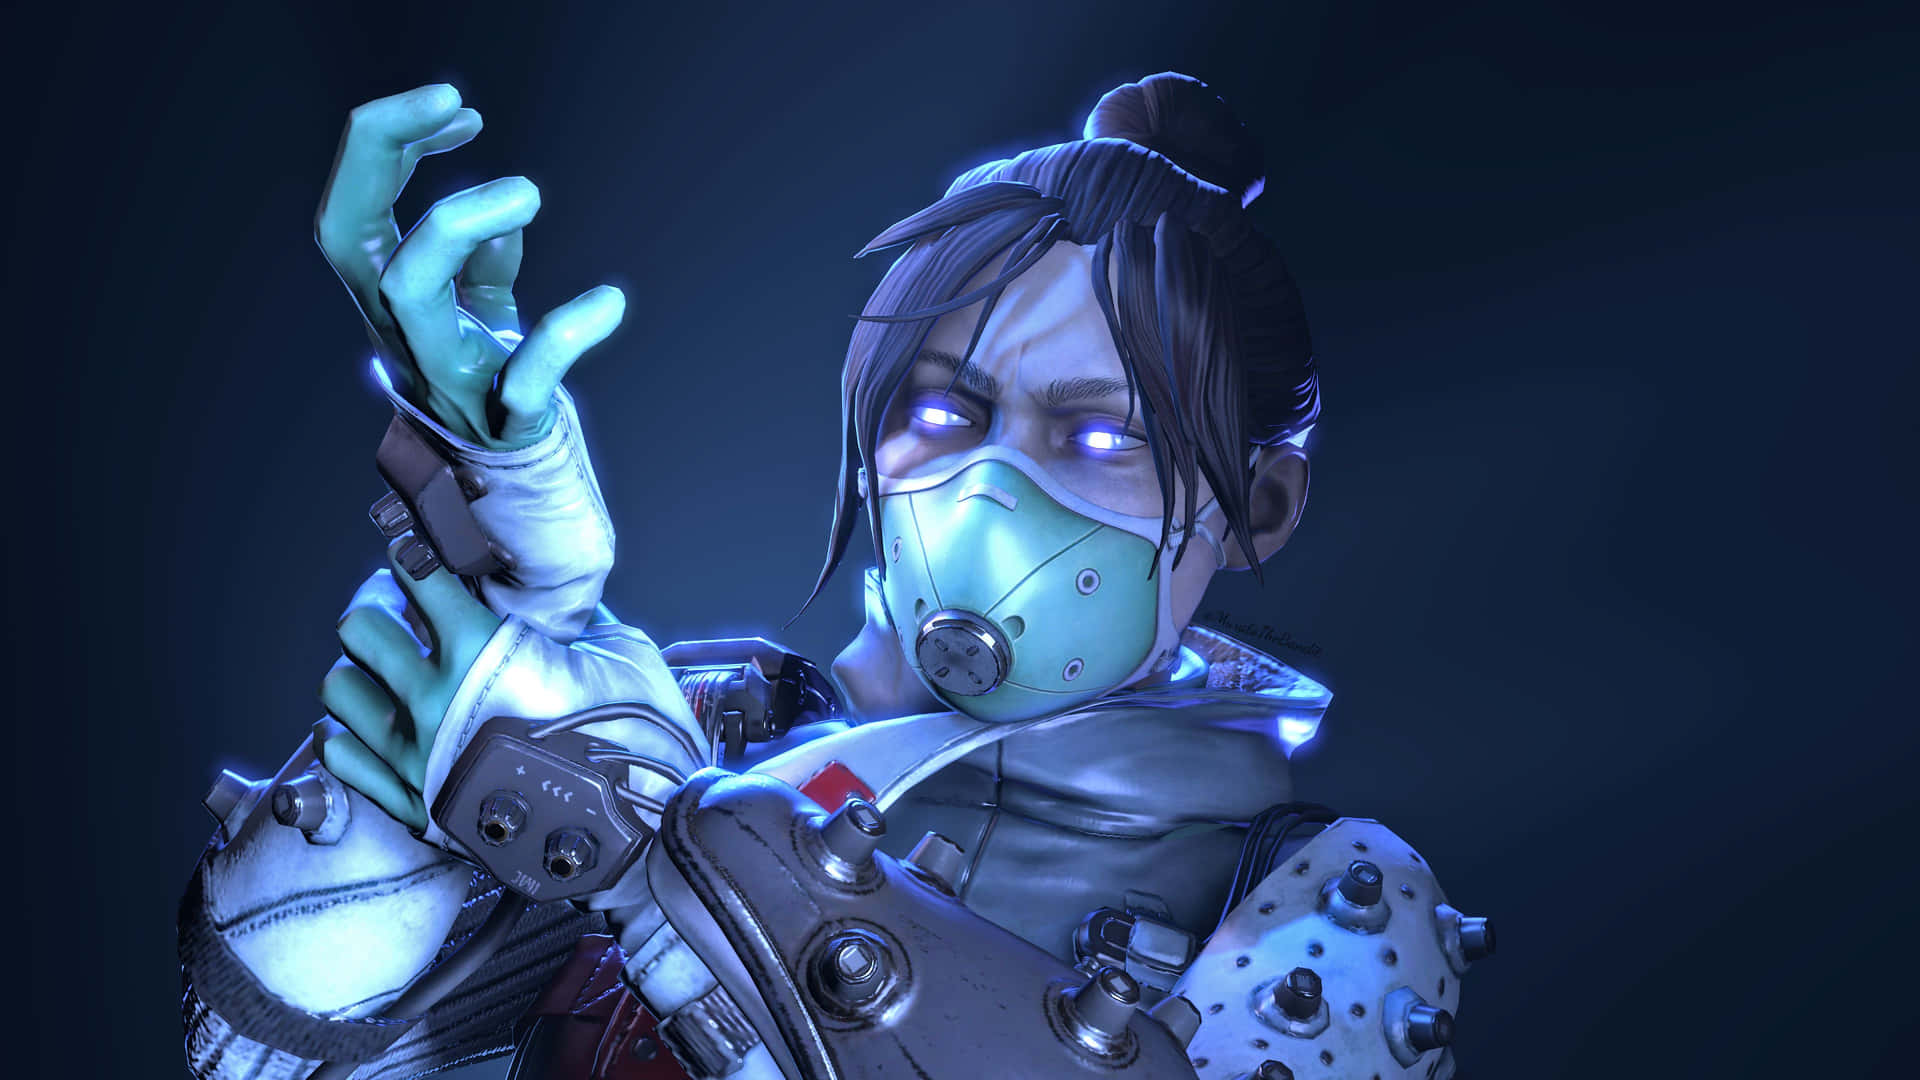 Apex Legends Prodigy - Wraith In Action Wallpaper